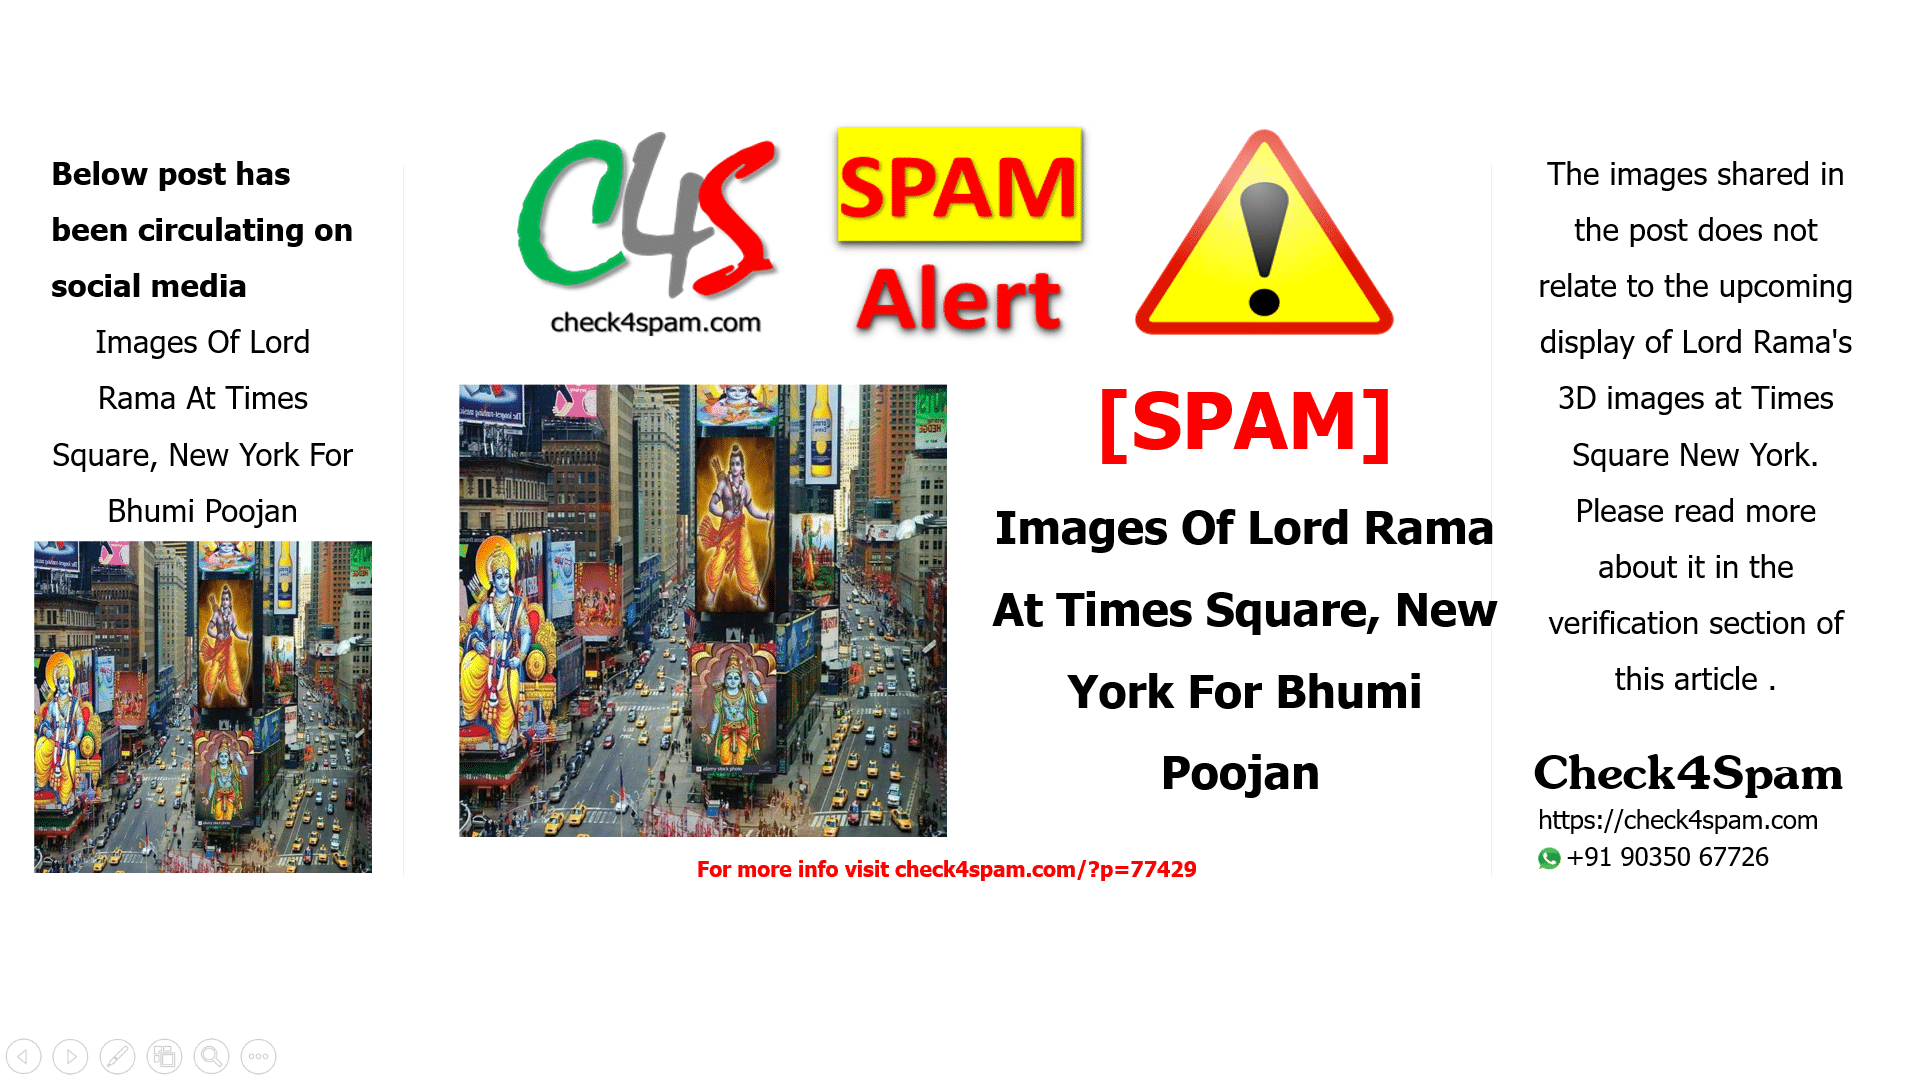 Images Of Lord Rama At Times Square, New York For Bhumi Poojan